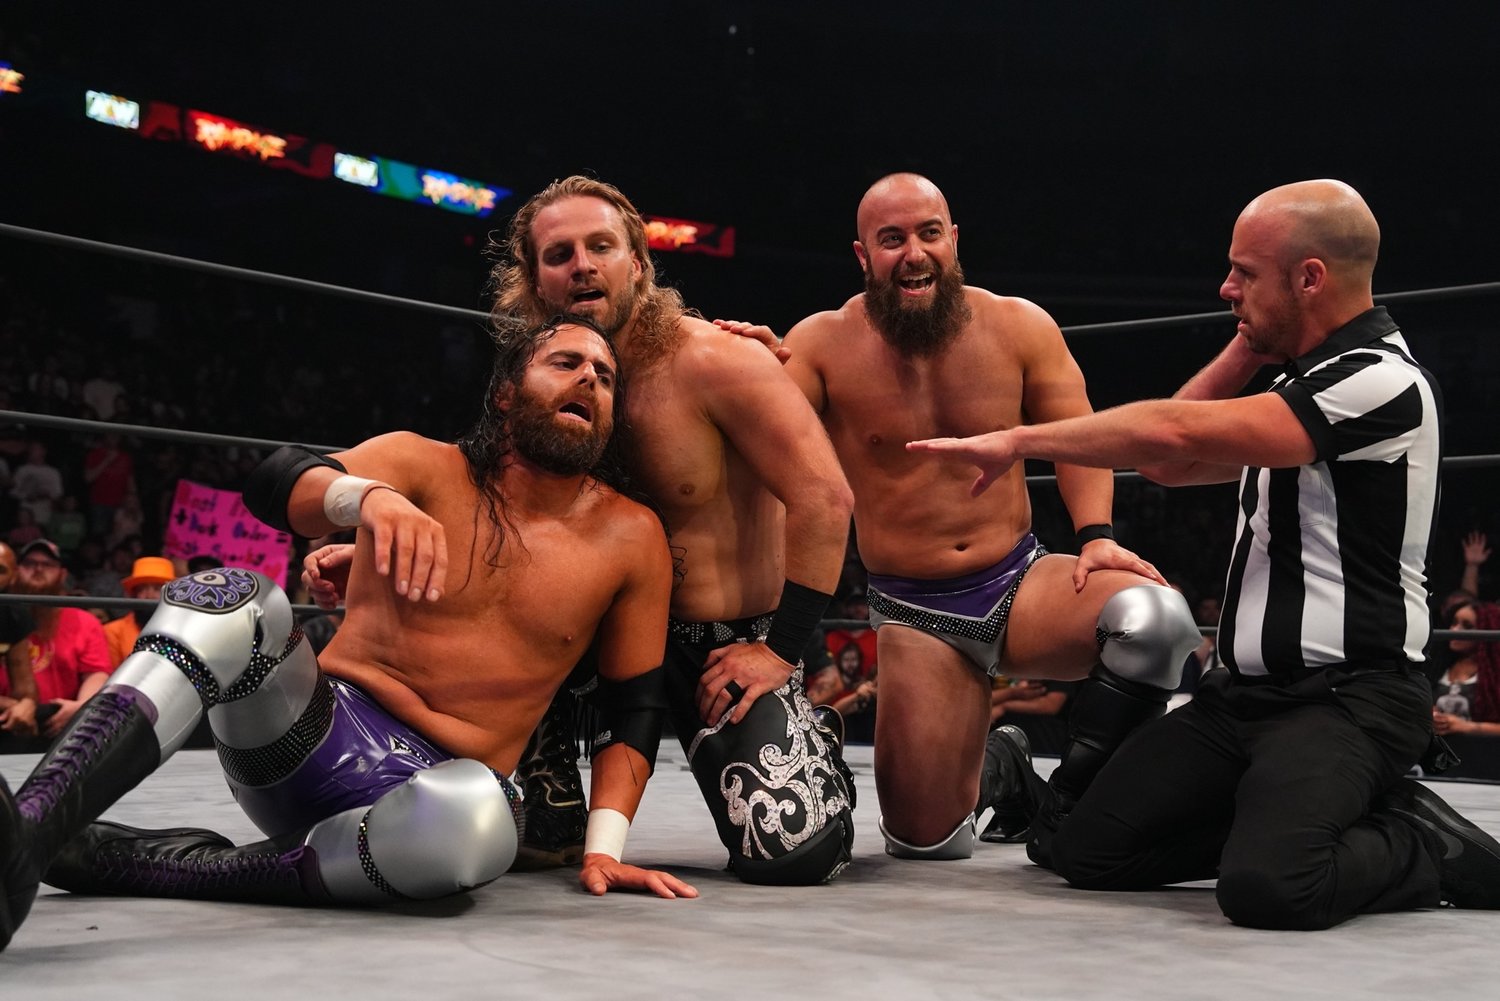 John Silver, right, takes in a victory alongside “Hangman” Adam Page, center, and Alex Reynolds, left.